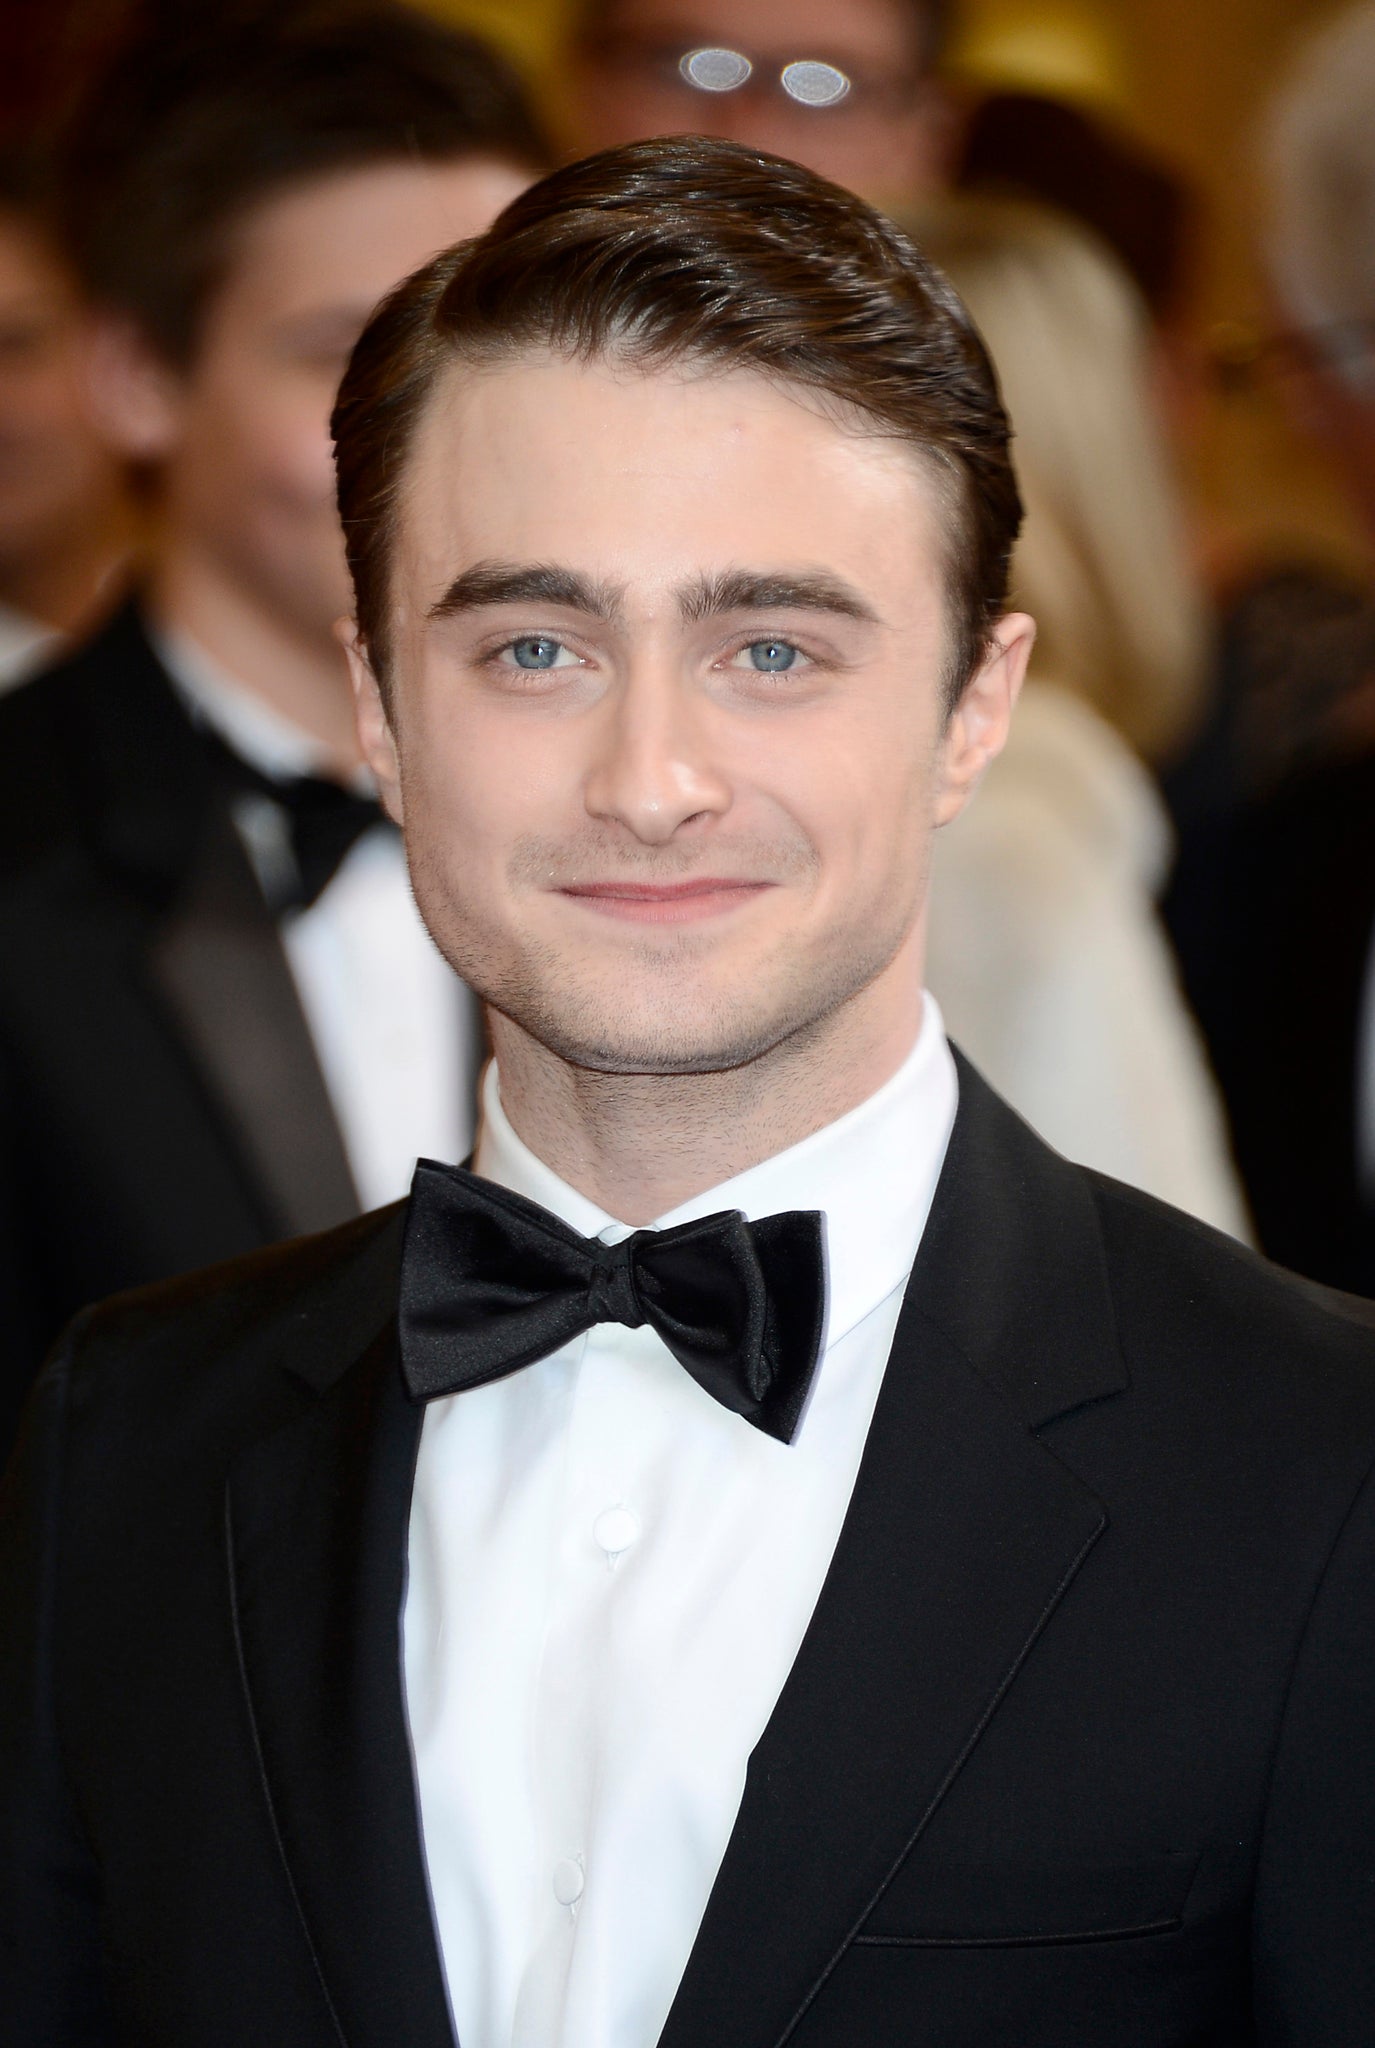 Daniel Radcliffe is close to being cast as Igor in a take on Mary Shelley's Frankenstein